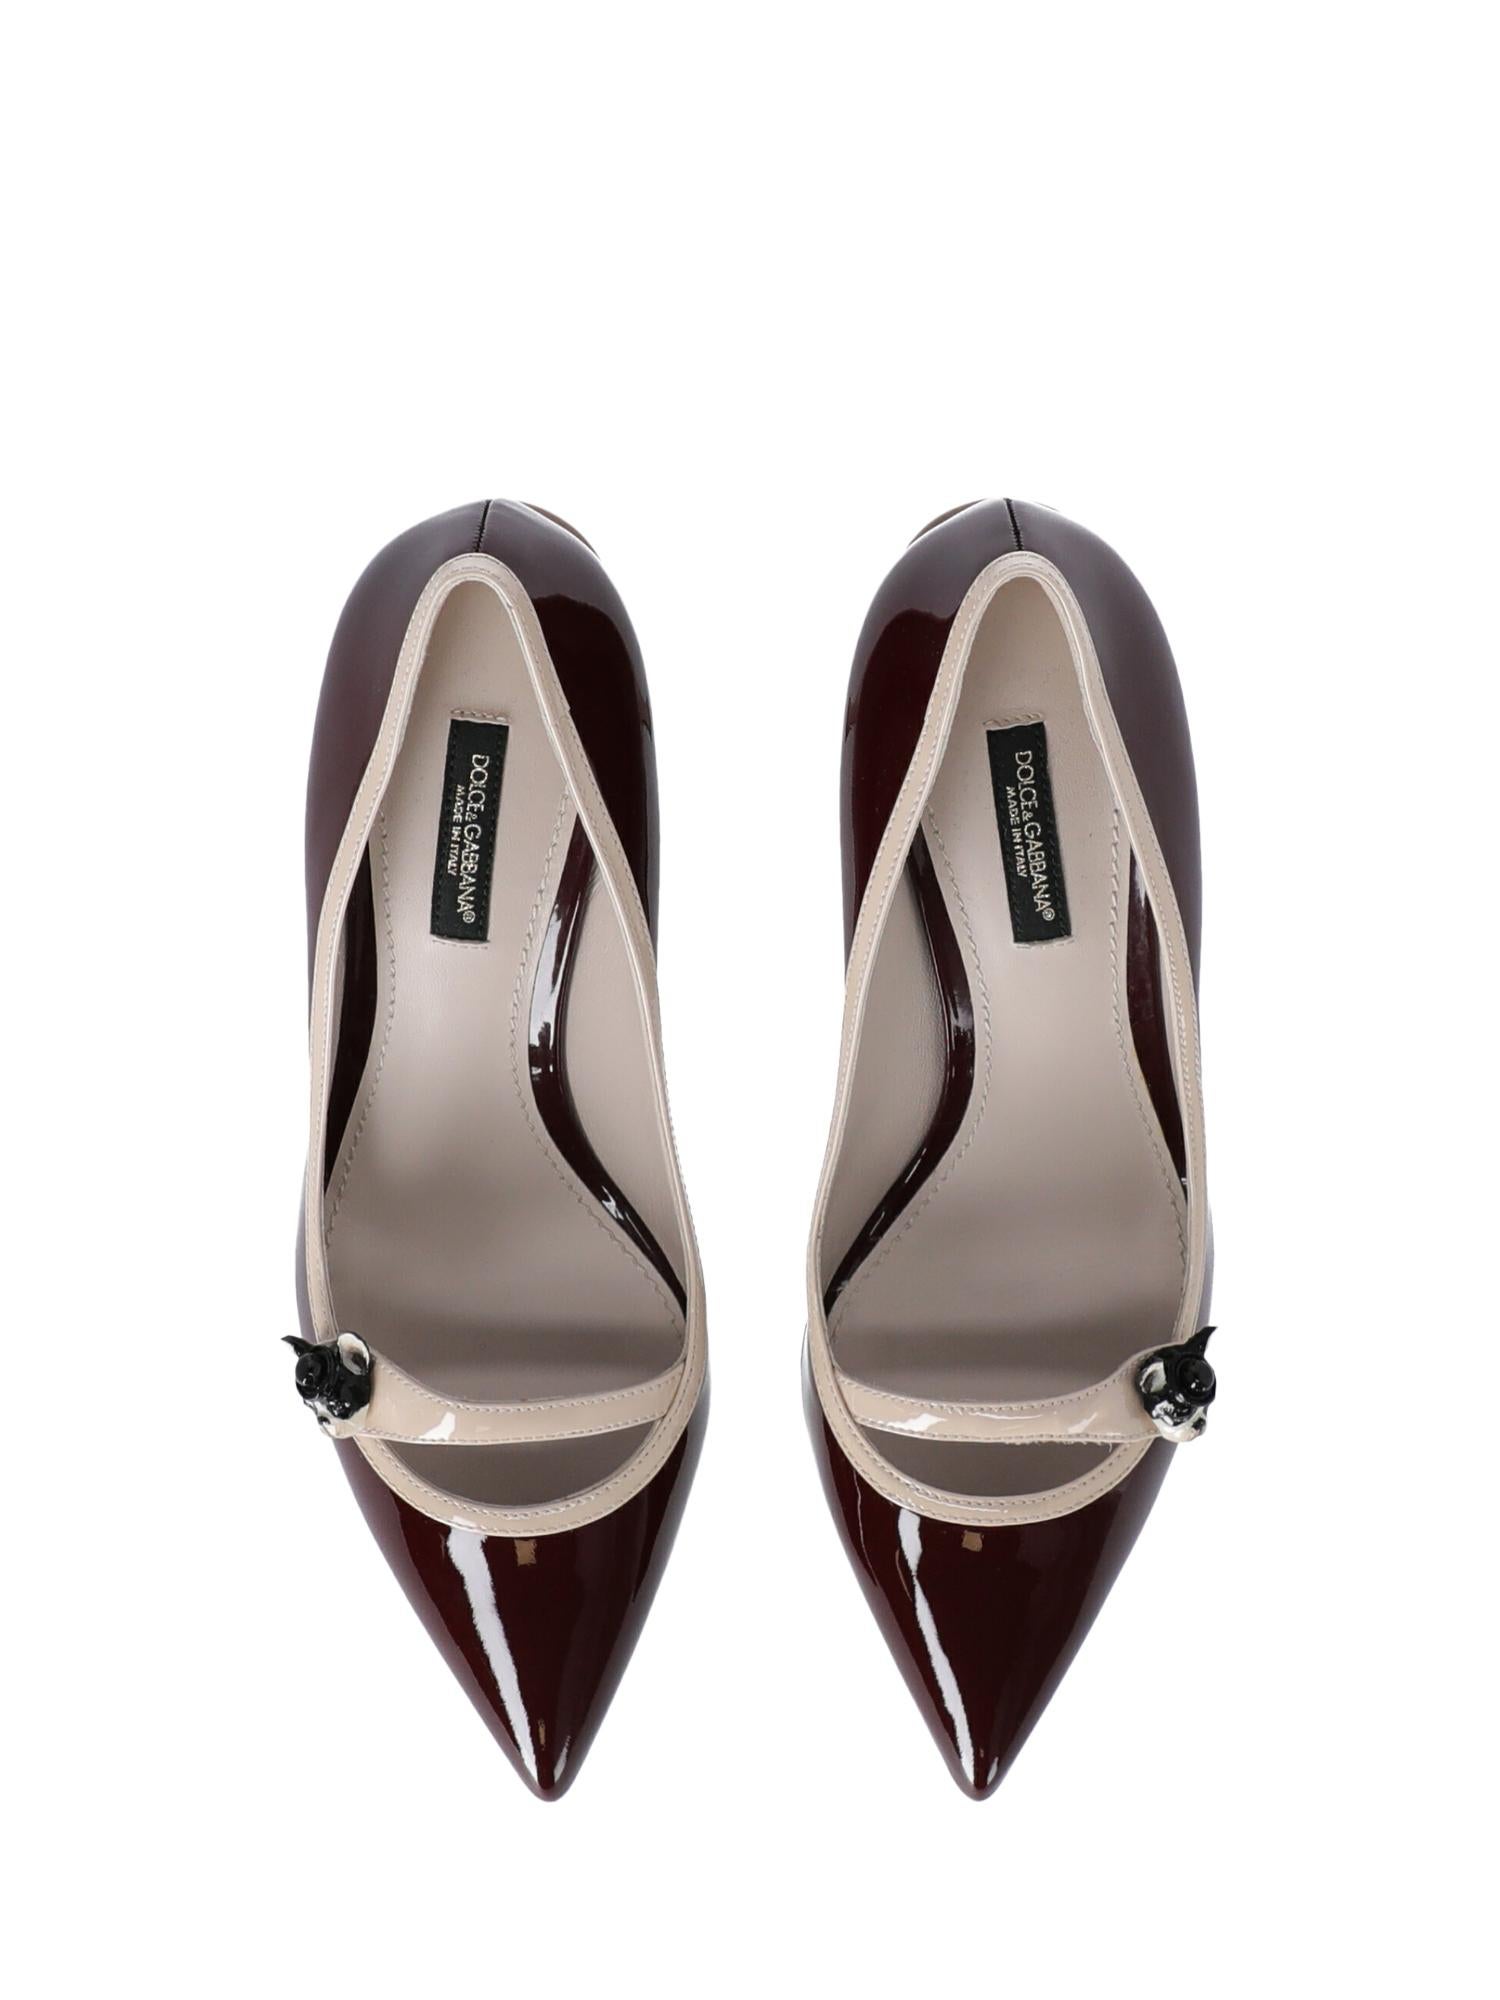 Dolce & Gabbana Woman Pumps Beige, Burgundy EU 37 In Excellent Condition For Sale In Milan, IT